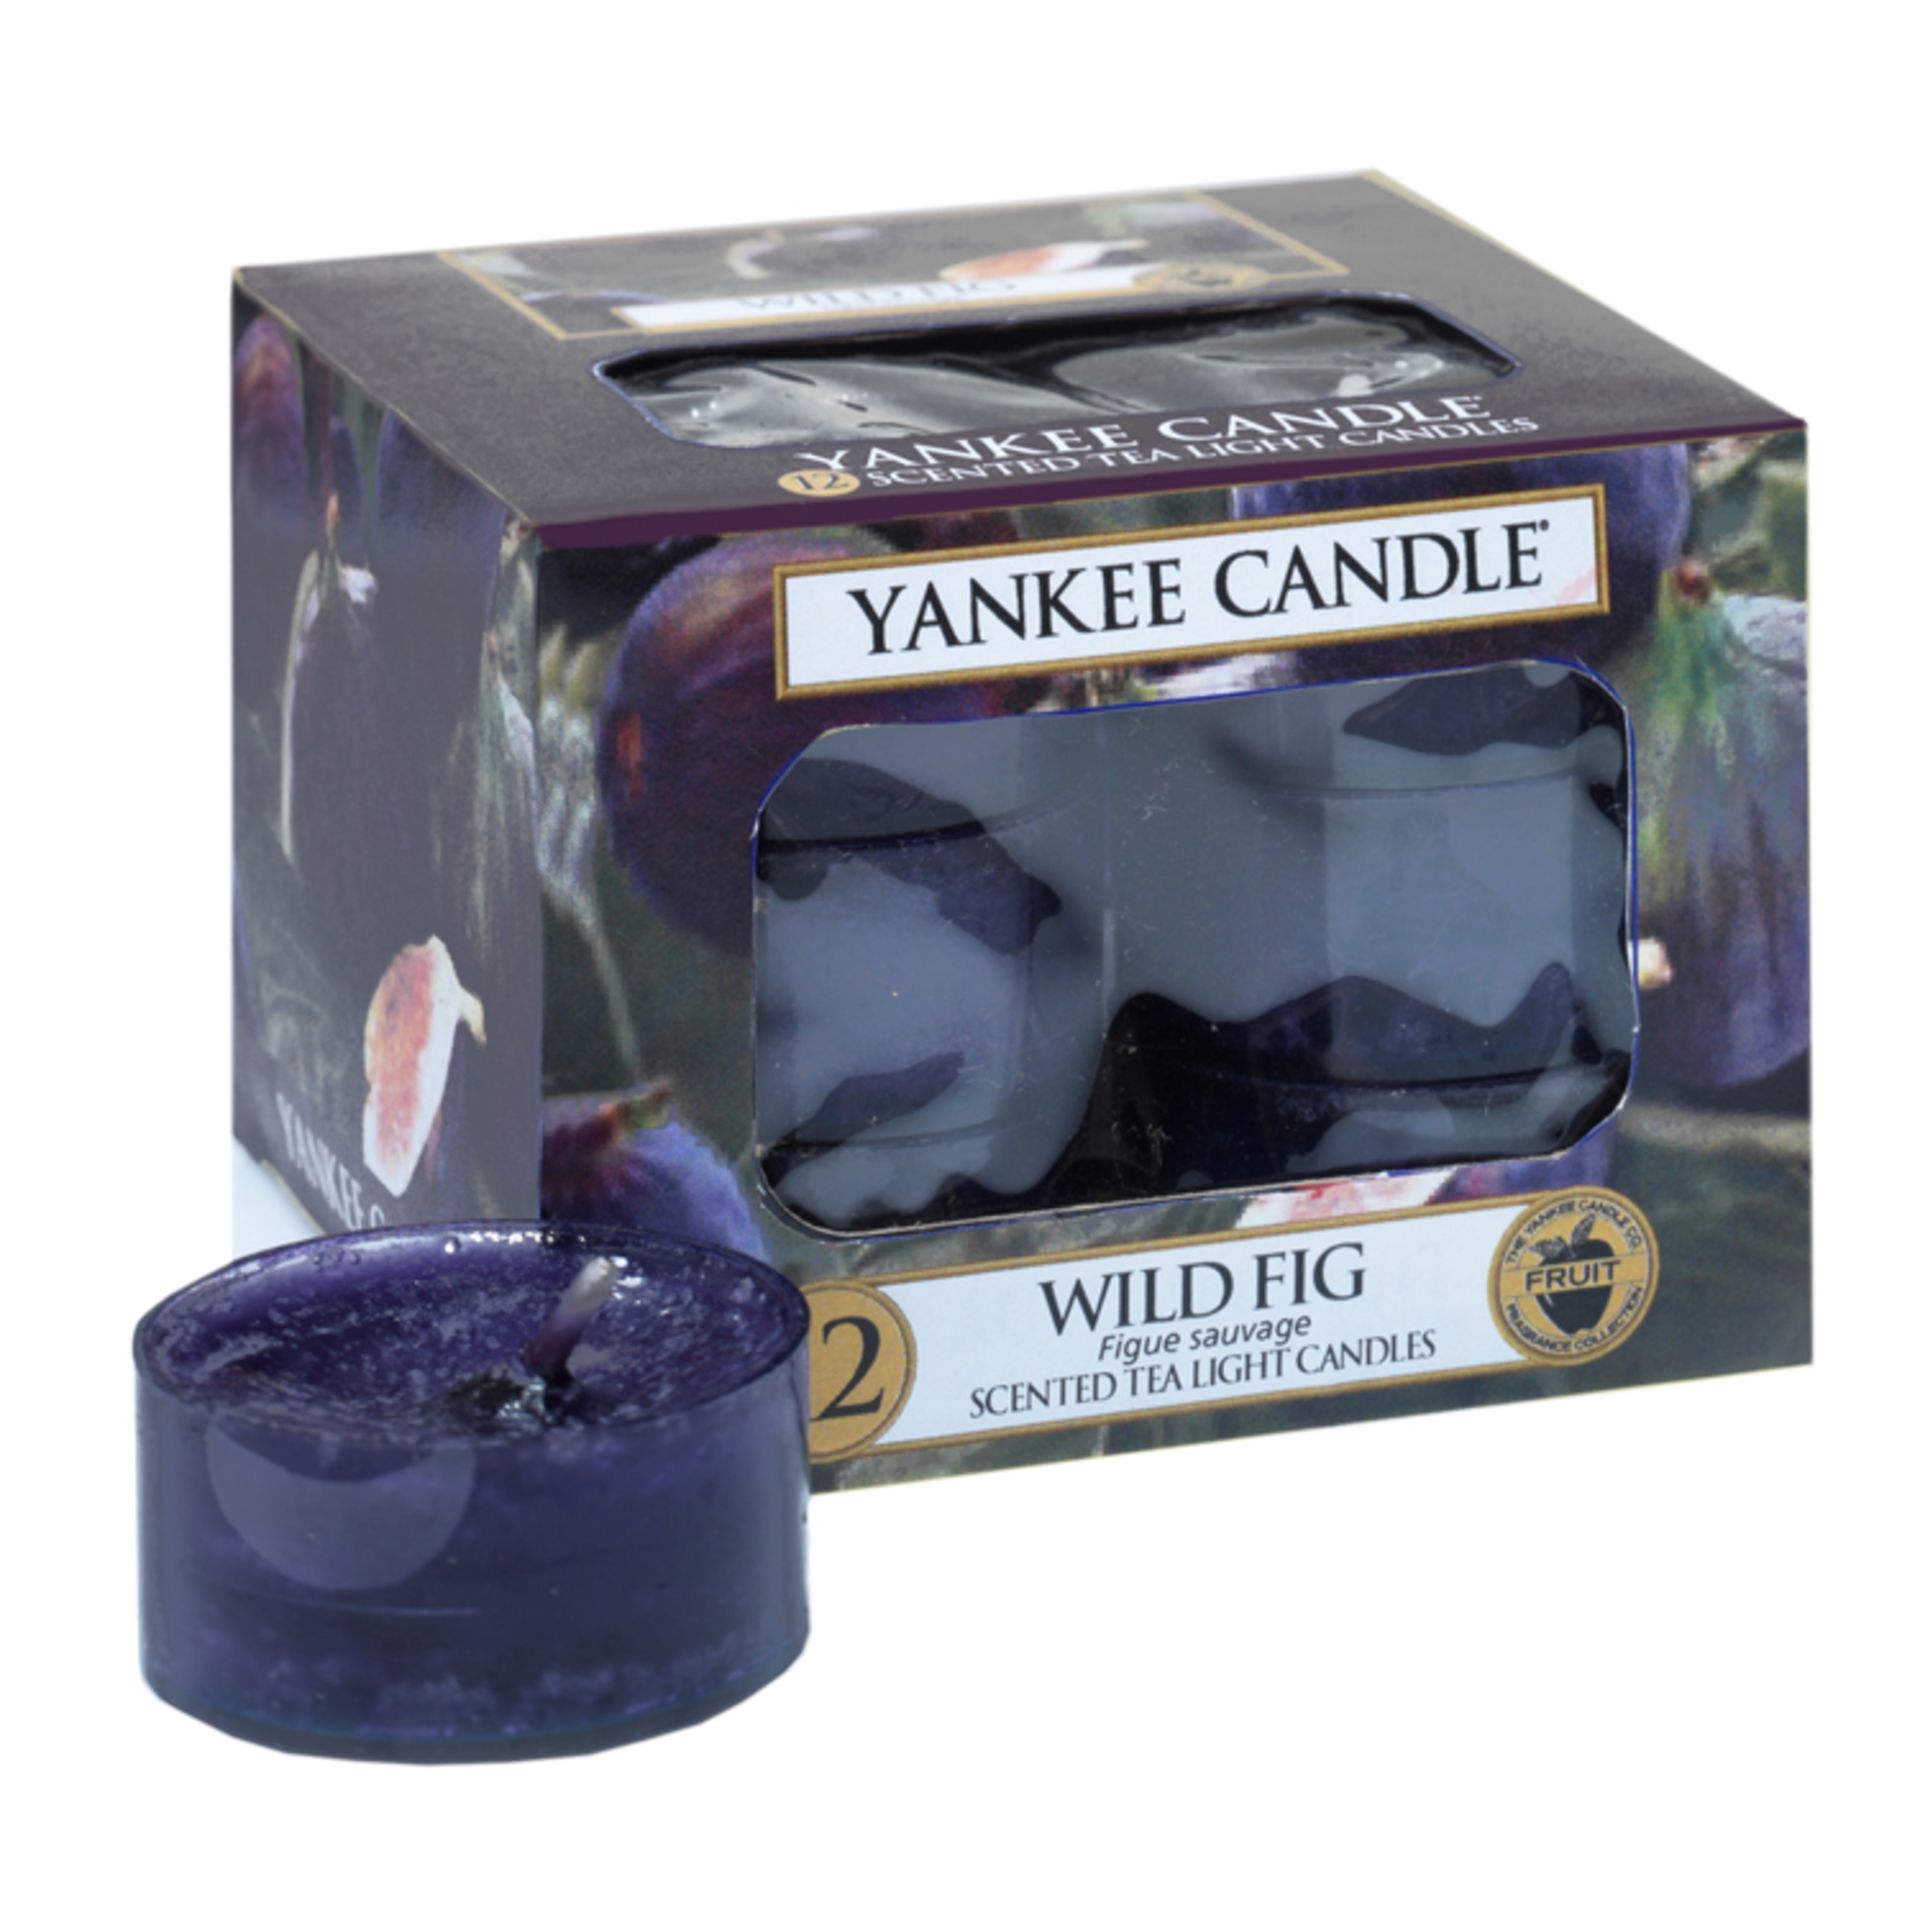 V *TRADE QTY* Brand New 12 Yankee Candle Scented Tea Light Candles Wild Fig eBay Price £7.75 X 3